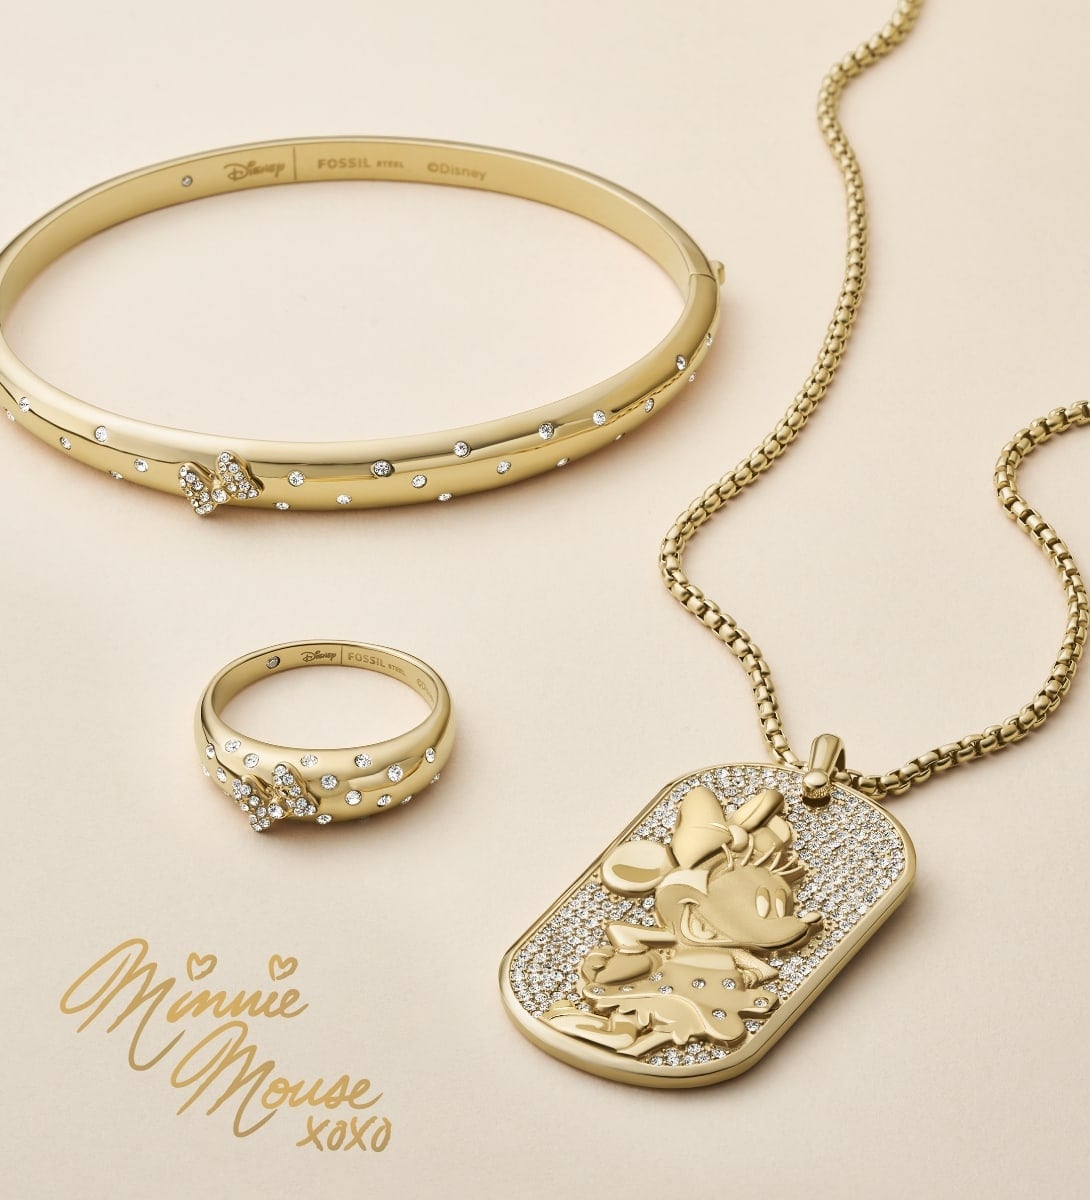 Three pieces of gold-tone Minnie Mouse jewelry, each accented with sparkling crystals to resemble Minnie's signature bow and polka dots. A bangle bracelet, ring and dog tag-style pendant necklace are artfully arranged on a cream-colored background. Minnie's signature is written in gold, along with hearts, x and o marks.